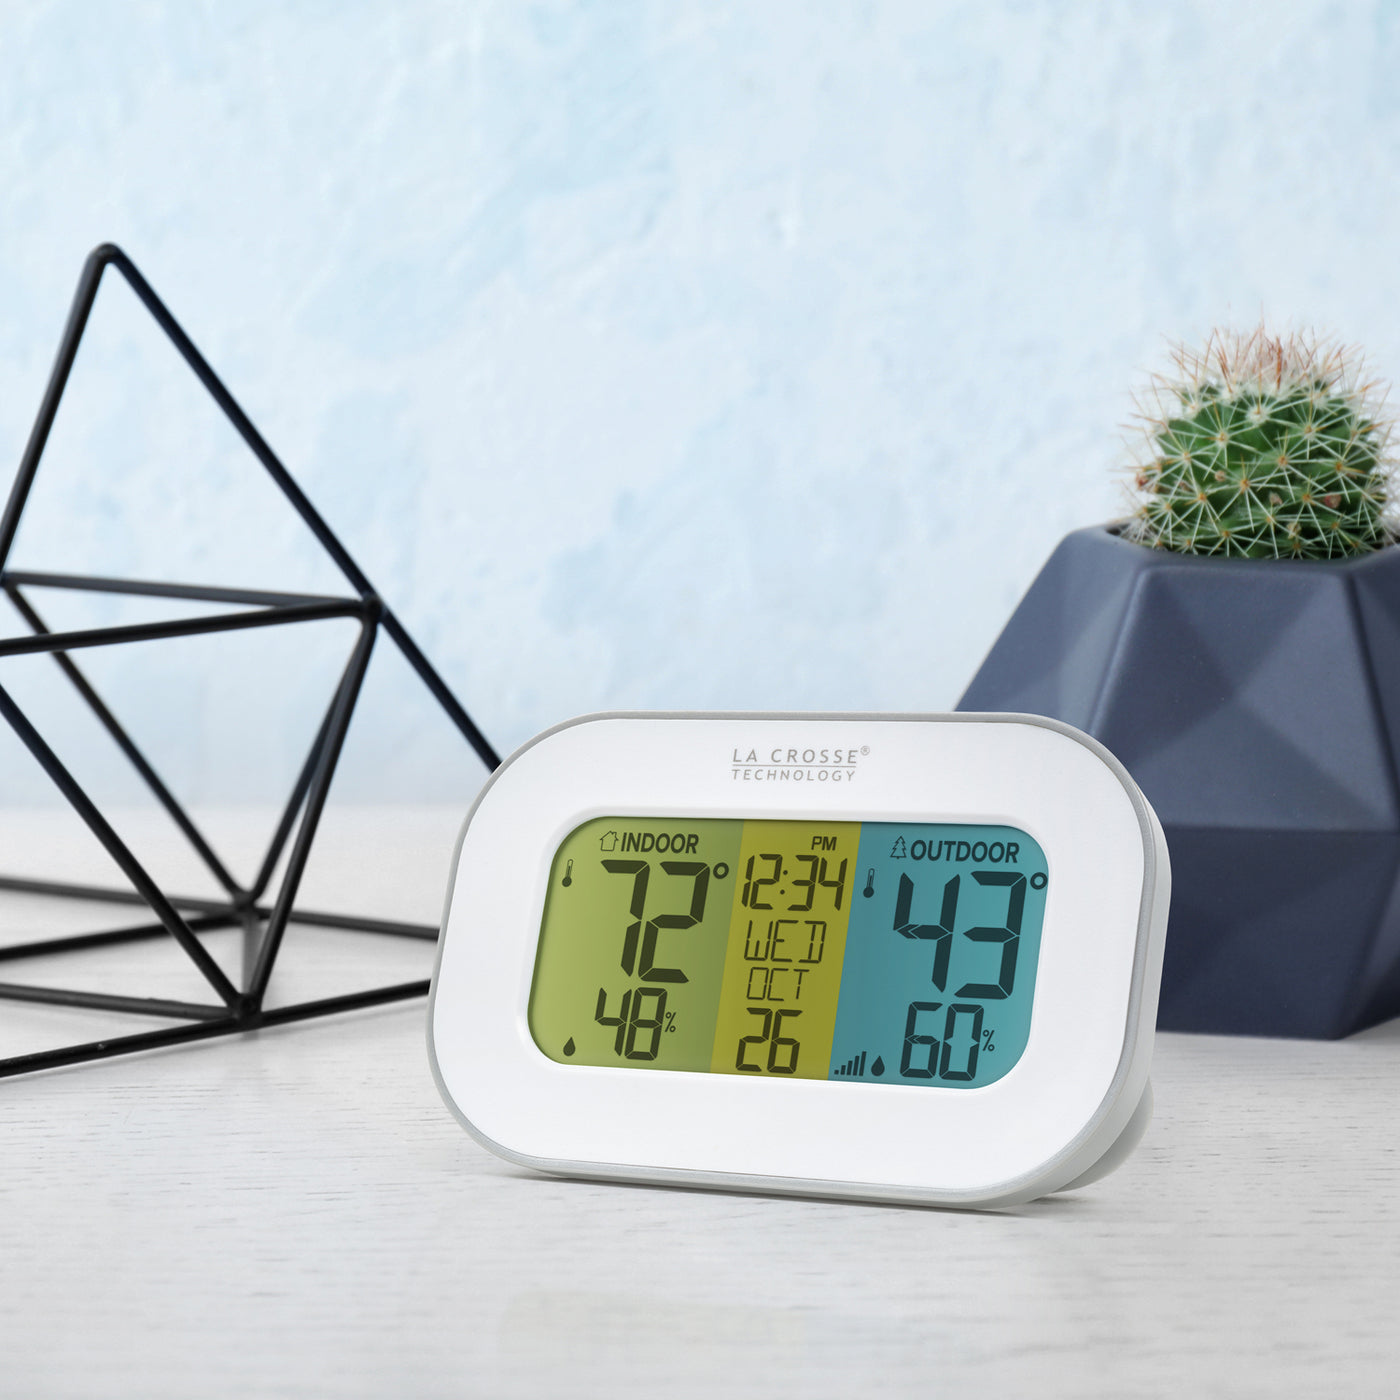 La Crosse Technology Wireless Temperature Station with Tri-Color LCD